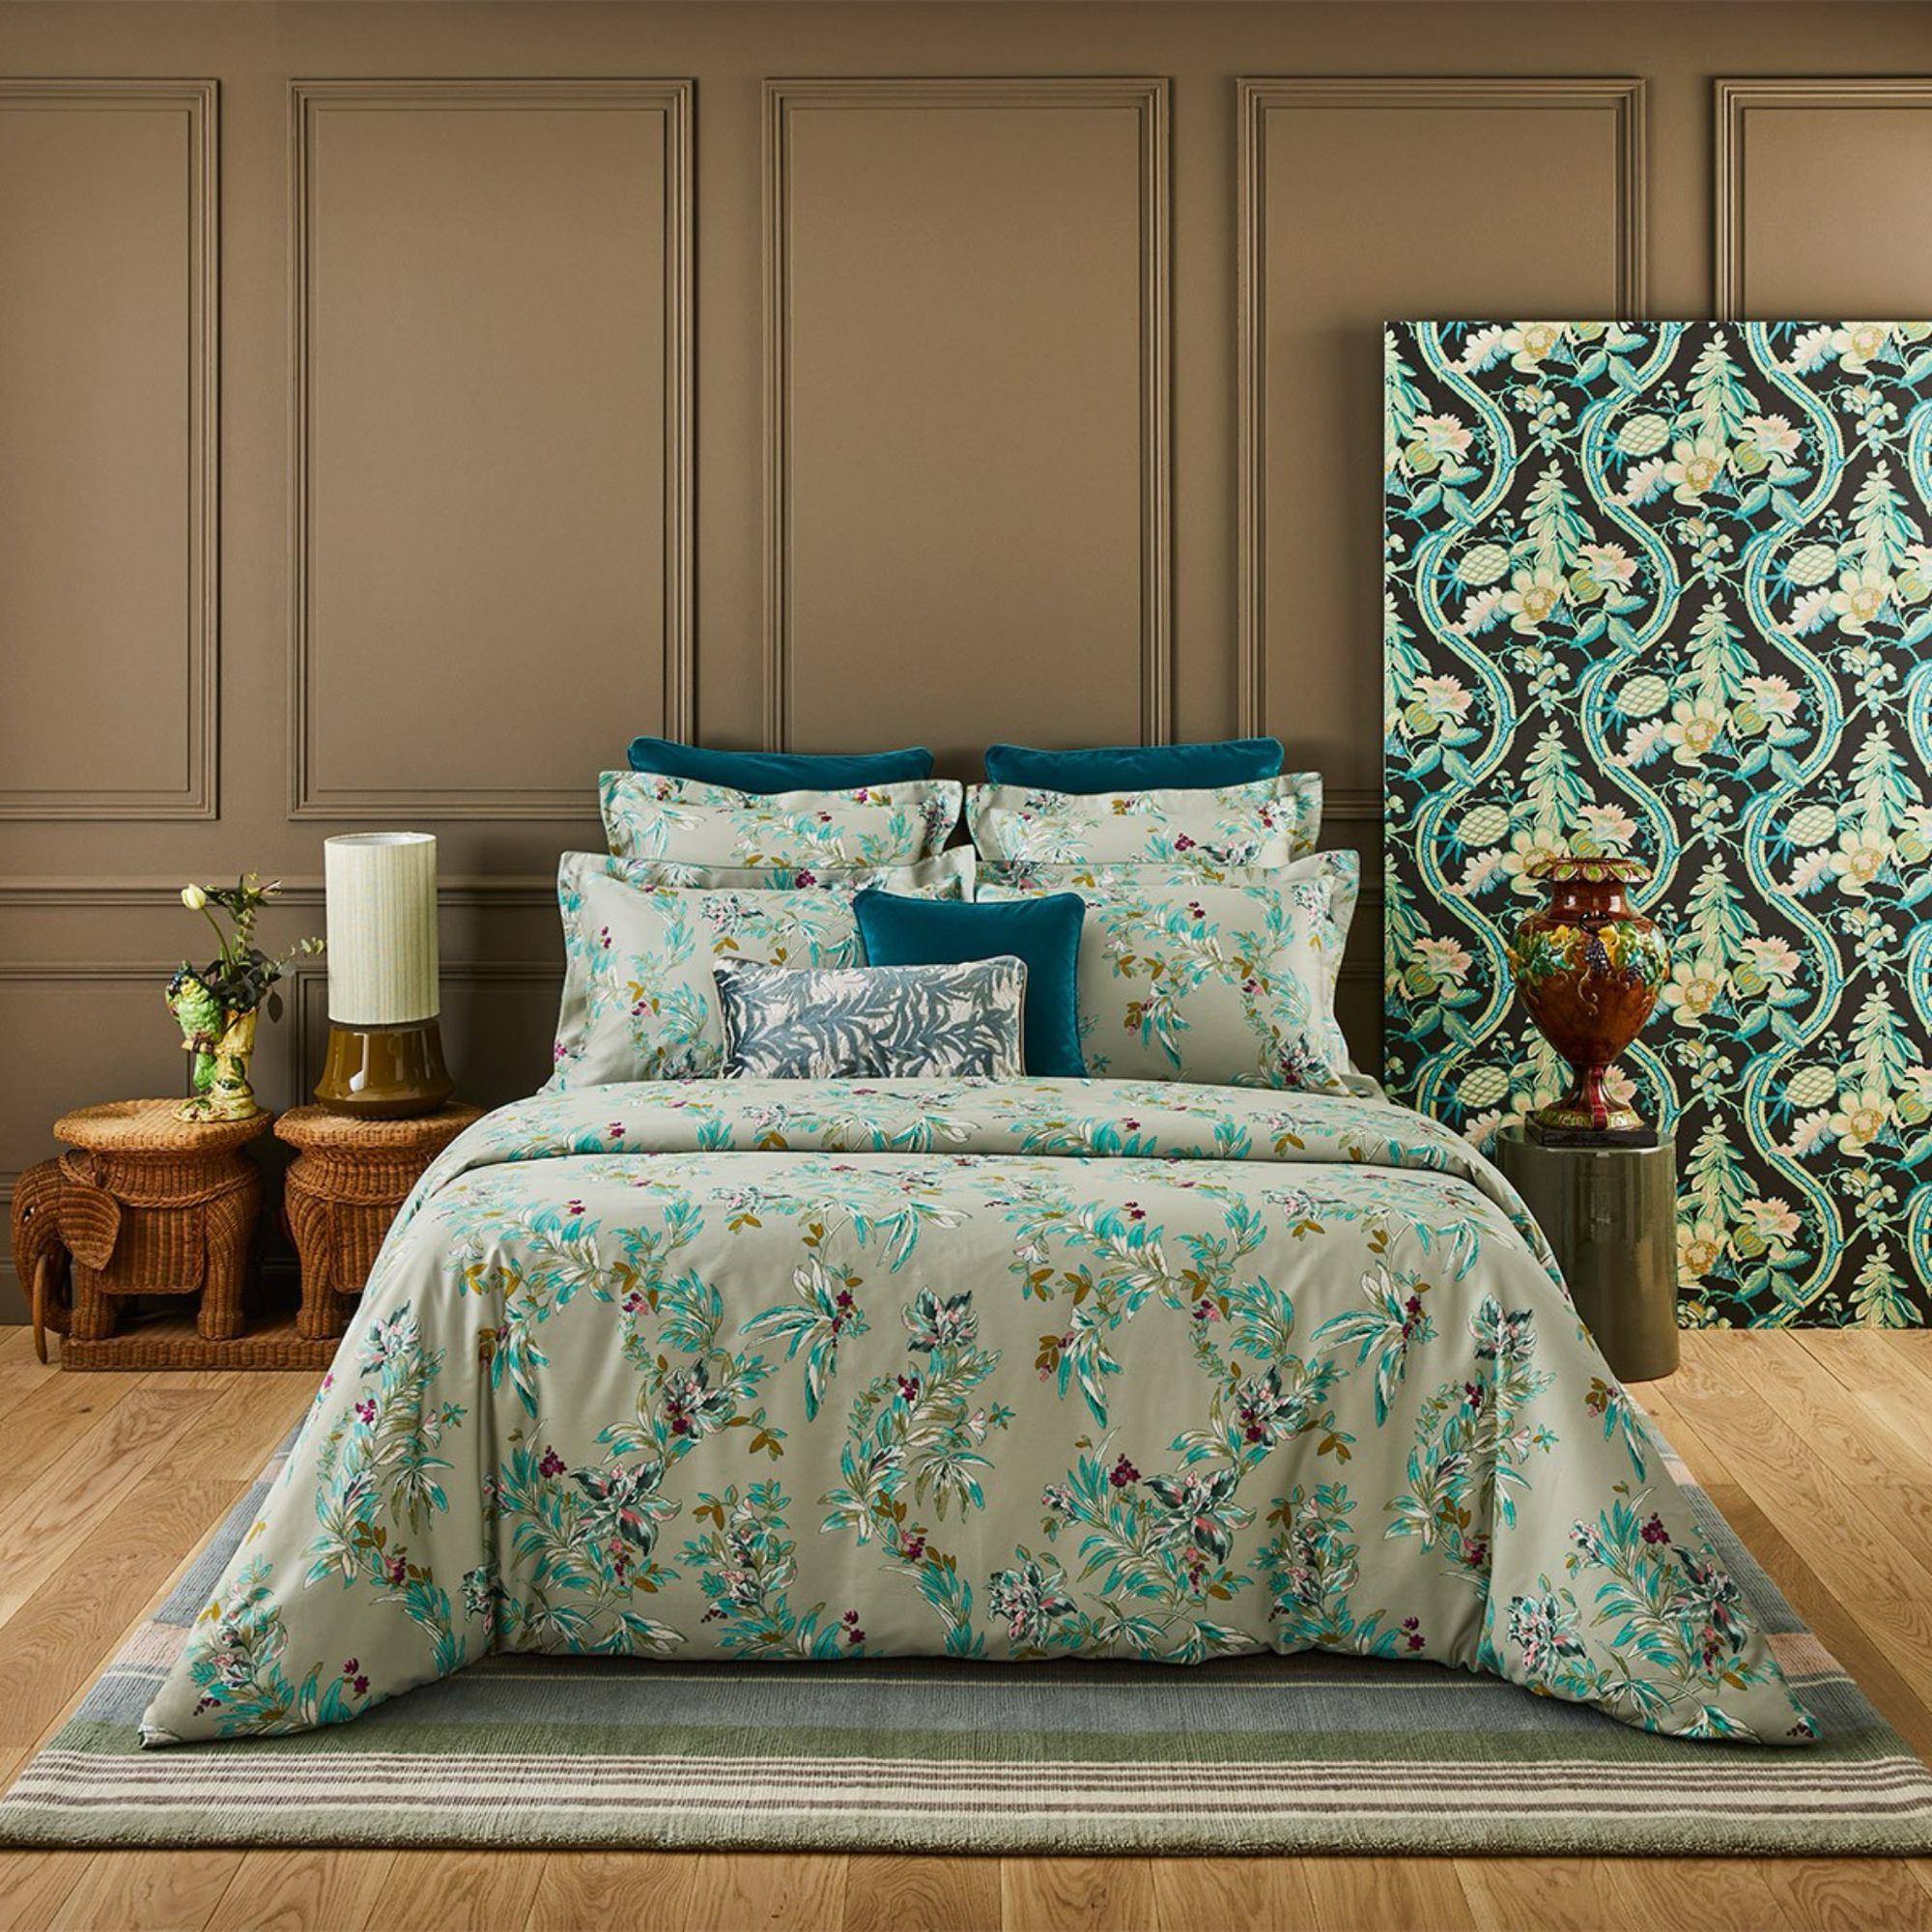 Bed Dressed in Yves Delorme Alcazar Bedding Collection